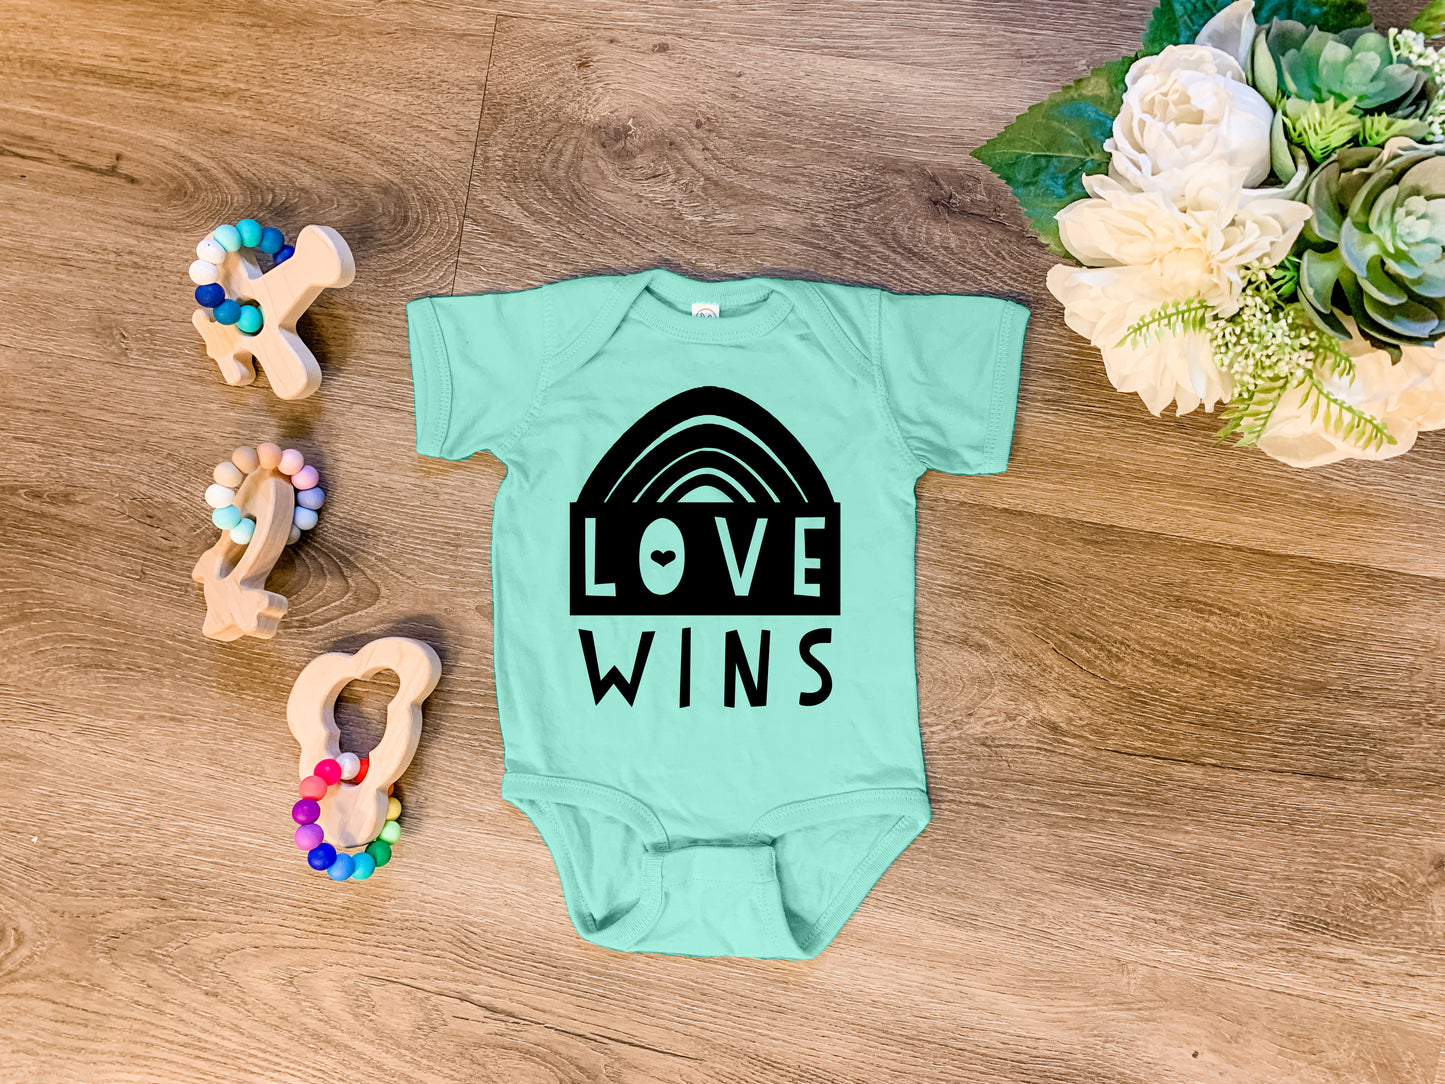 Love Wins - Onesie - Heather Gray, Chill, or Lavender